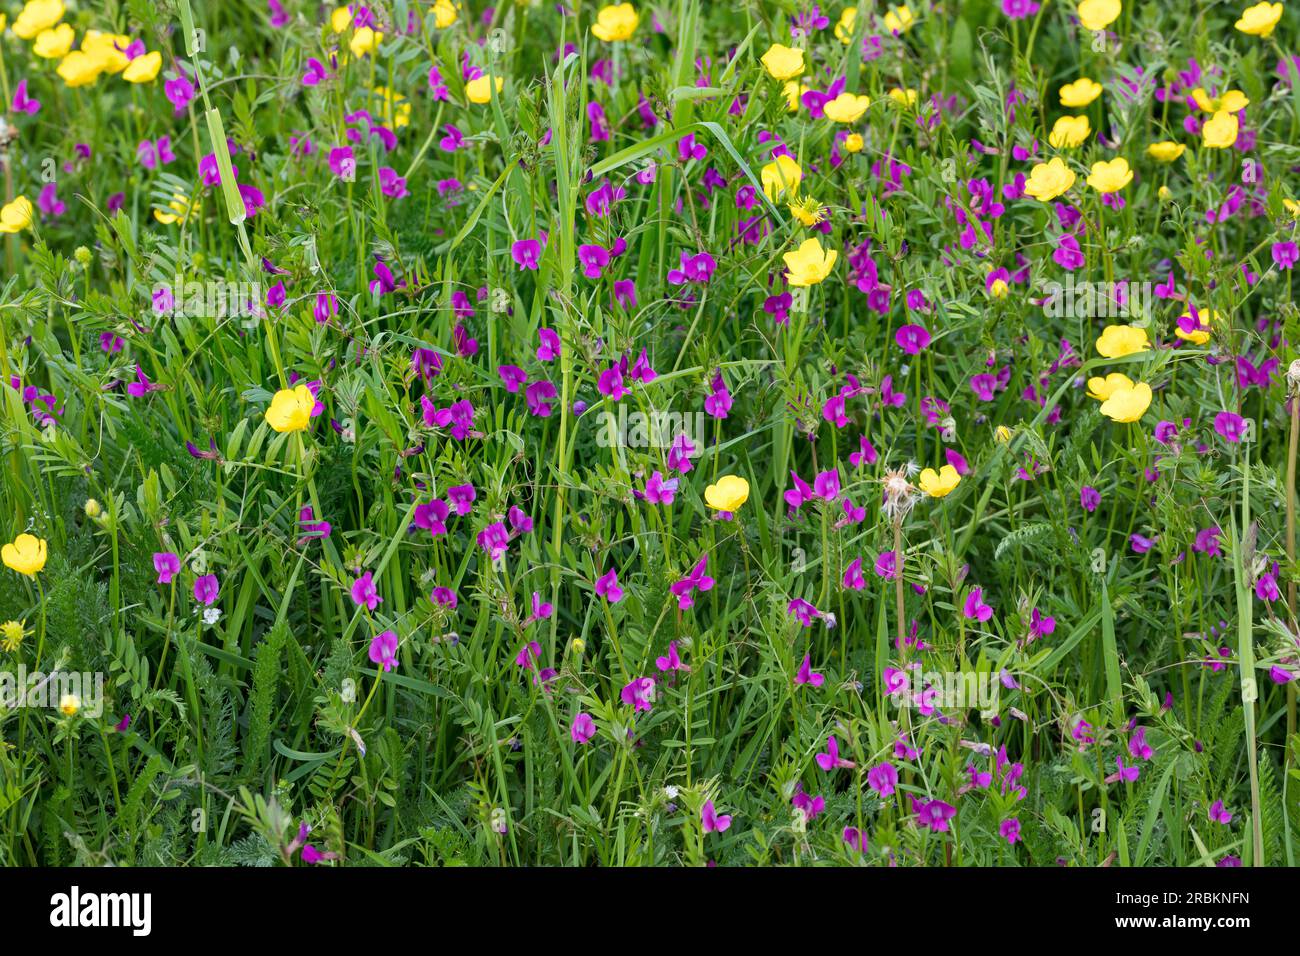 Common vetch (Vicia angustifolia ssp. segetalis, Vicia segetalis, Vicia sativa subsp. segetalis), blooming among buttercups, Germany Stock Photo